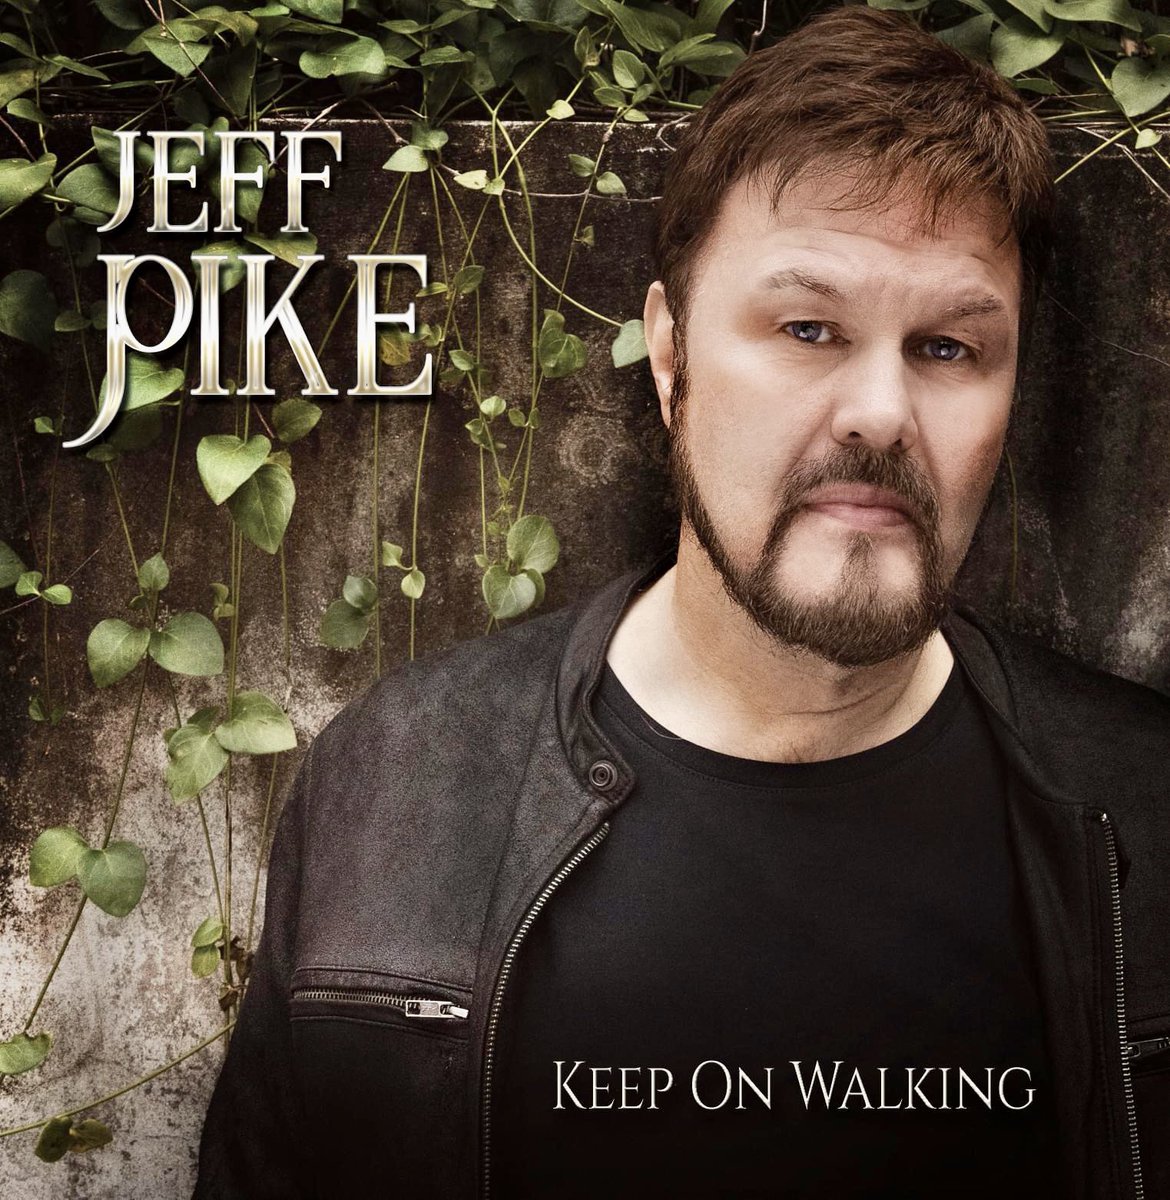 Looking out my window and it is raining. Looking into my soul and it is raining. So I want to share with you a beautiful rainy day song. - youtu.be/fsNl4UjQZEo - #jeffpike #newmusic #NewMusic2023 #NewMusicAlert #easylistening #adultcontemporary #smoothjazz